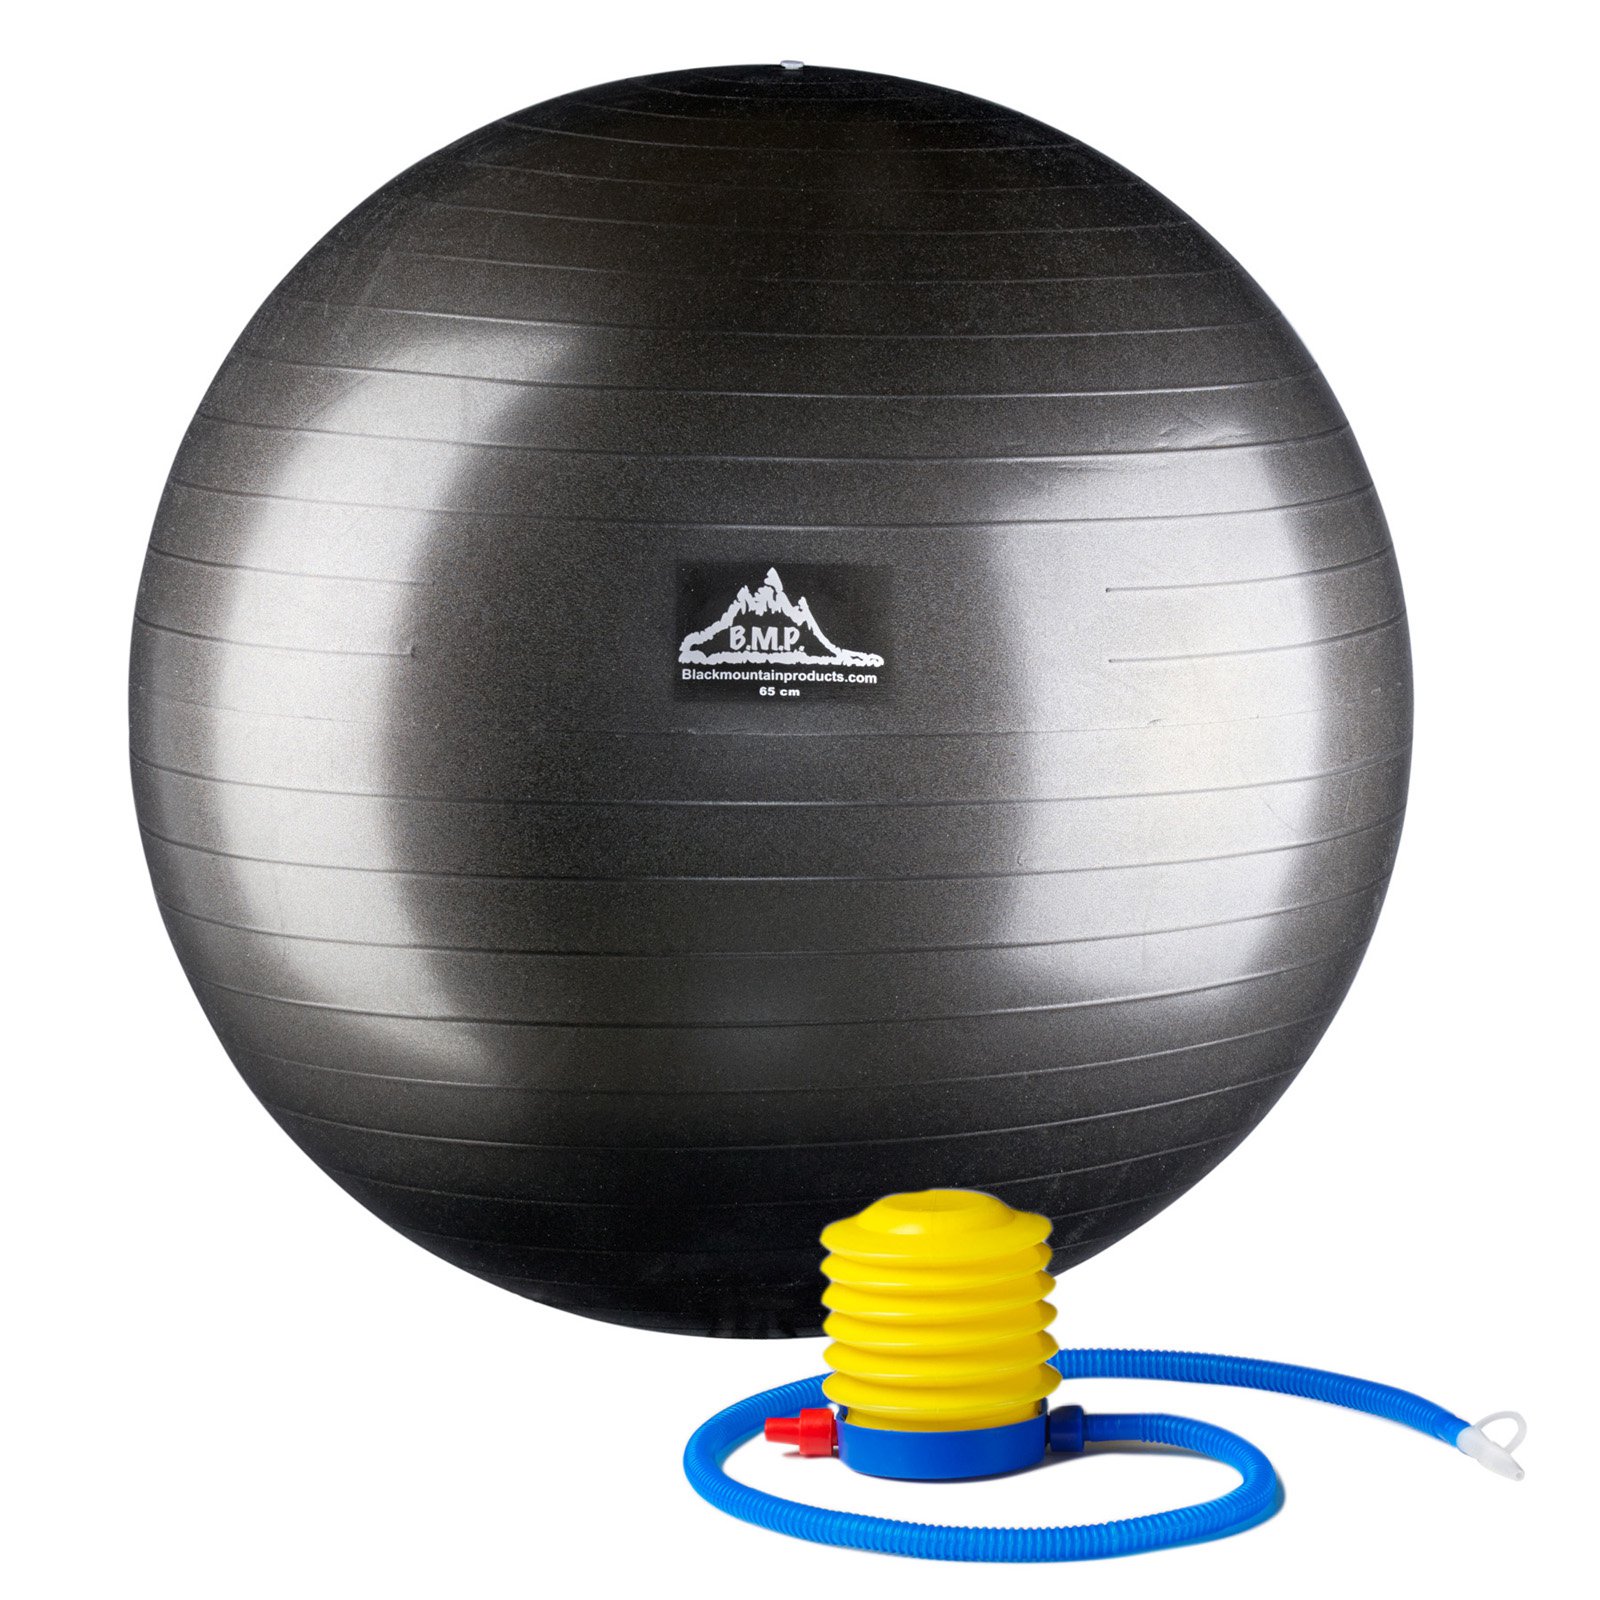 Black Mountain Products Professional Grade Stability Ball - Pro Series 1000 Lbs. Anti-burst 2000 Lbs. Static Weight Capacity, 55 cm Blue - image 2 of 5